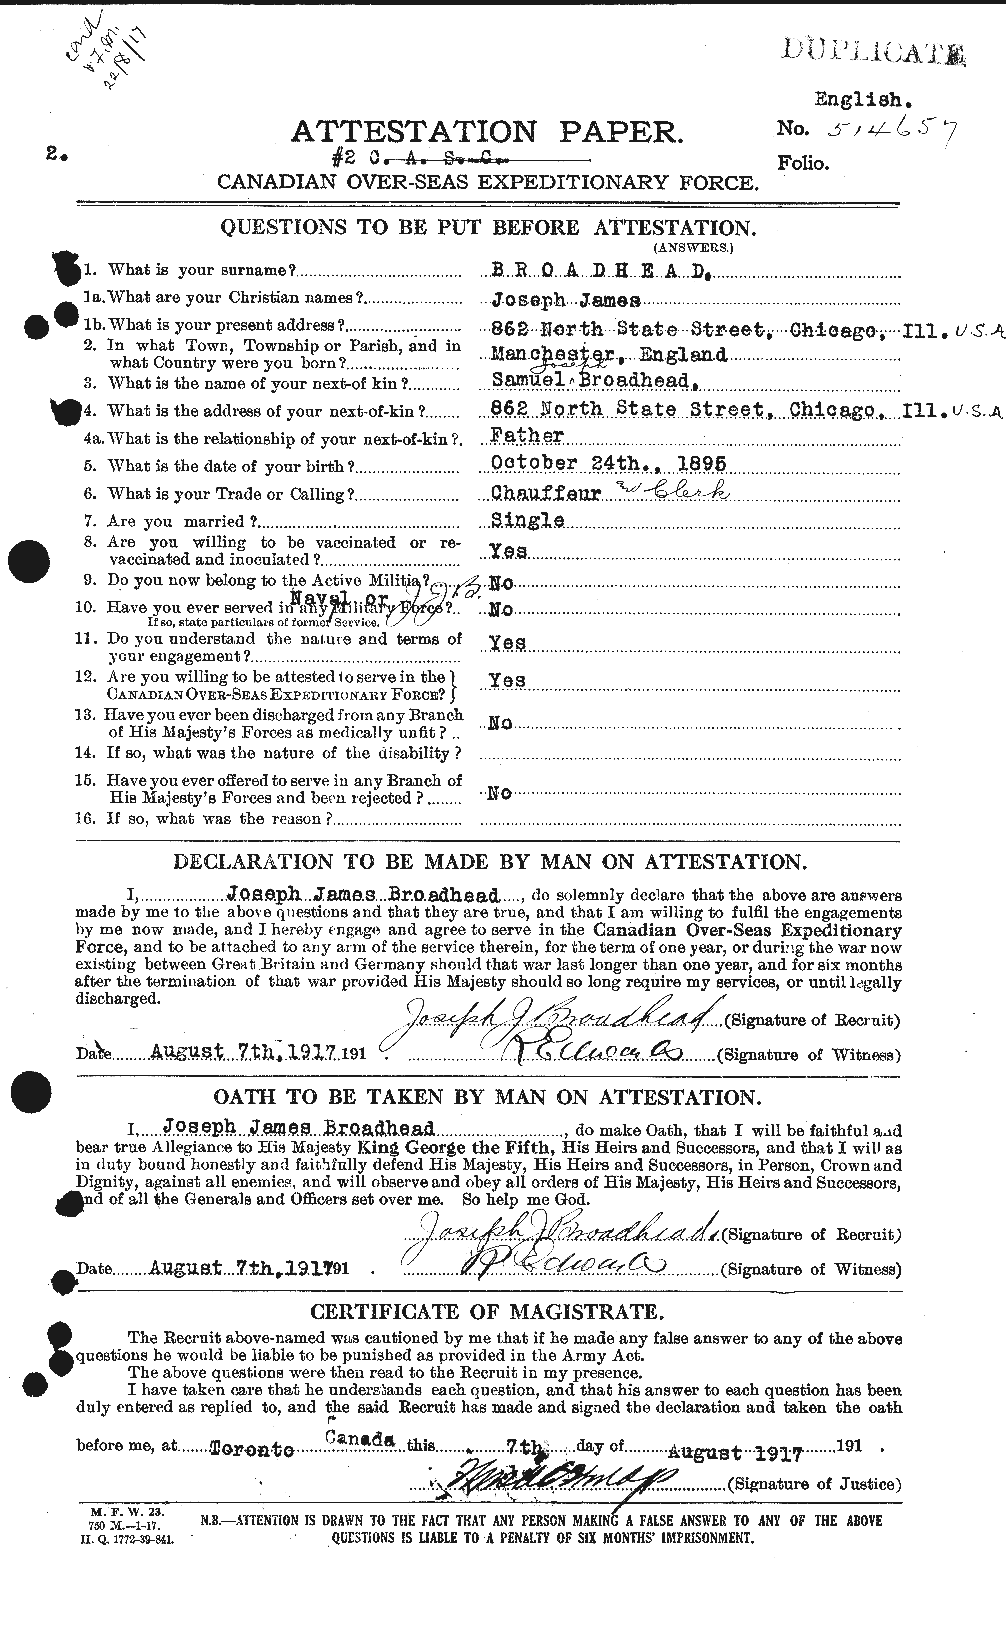 Personnel Records of the First World War - CEF 263773a